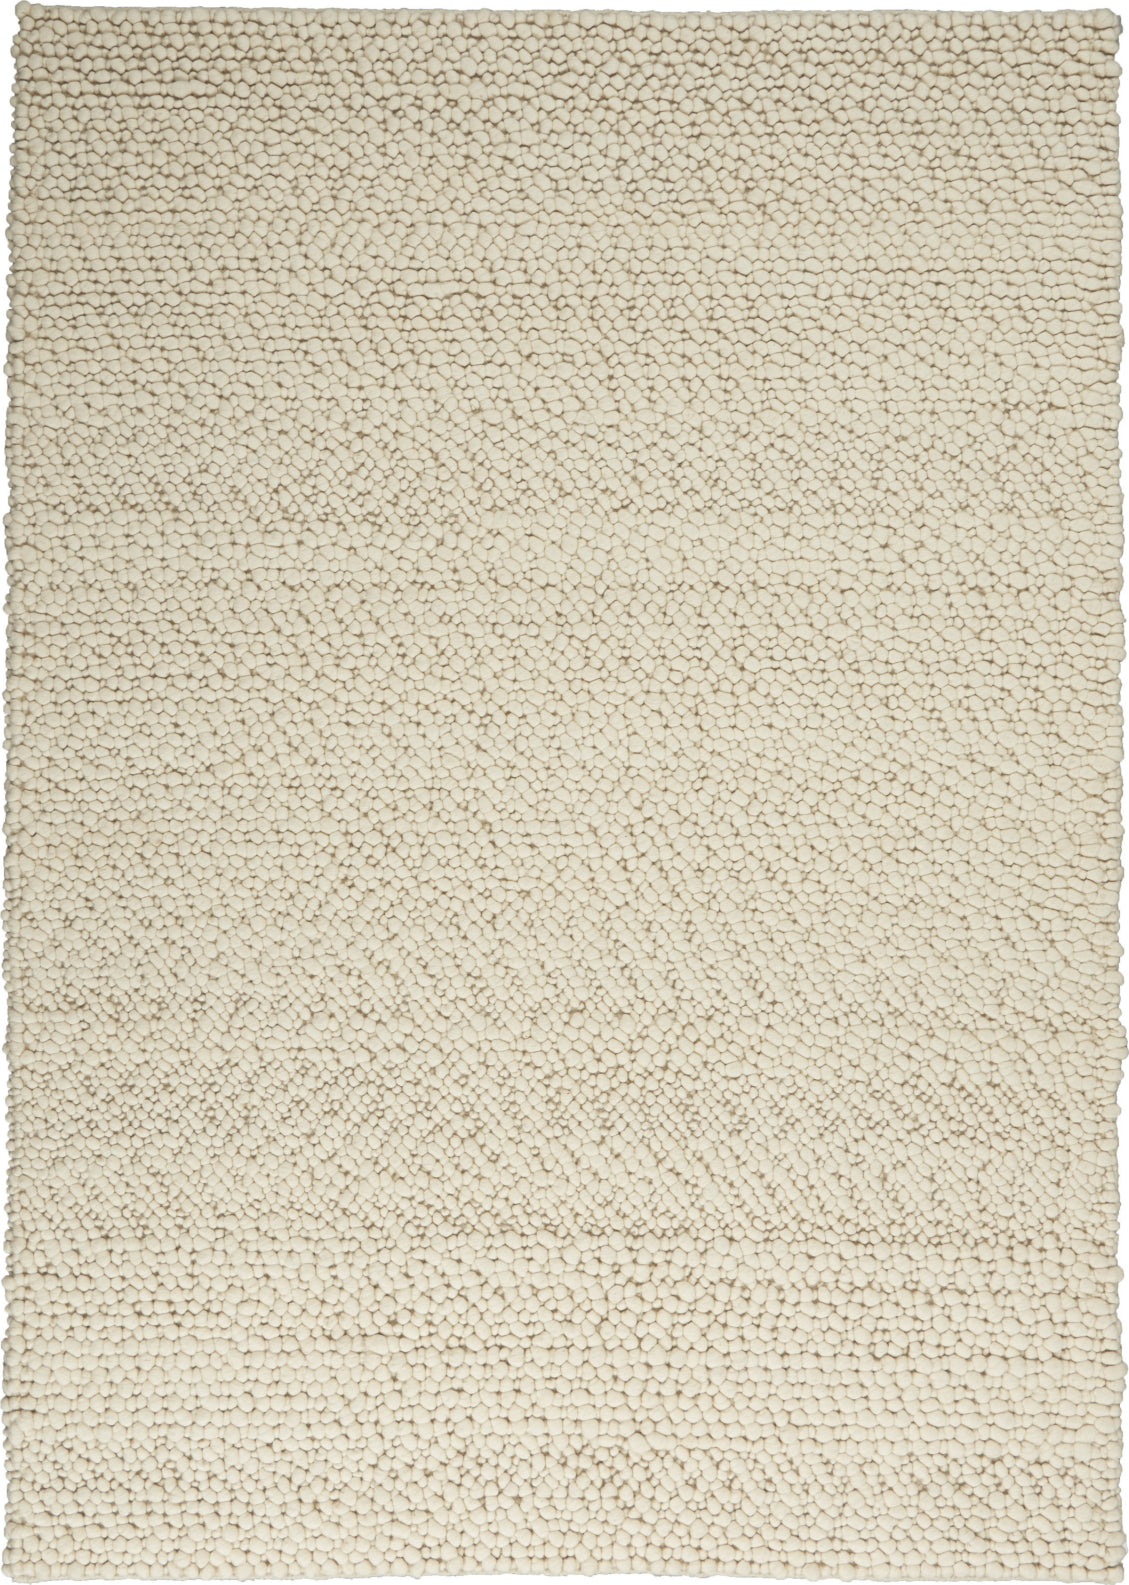 Calvin Klein Ck940 Riverstone Ivory Area Rug – Incredible Rugs and Decor